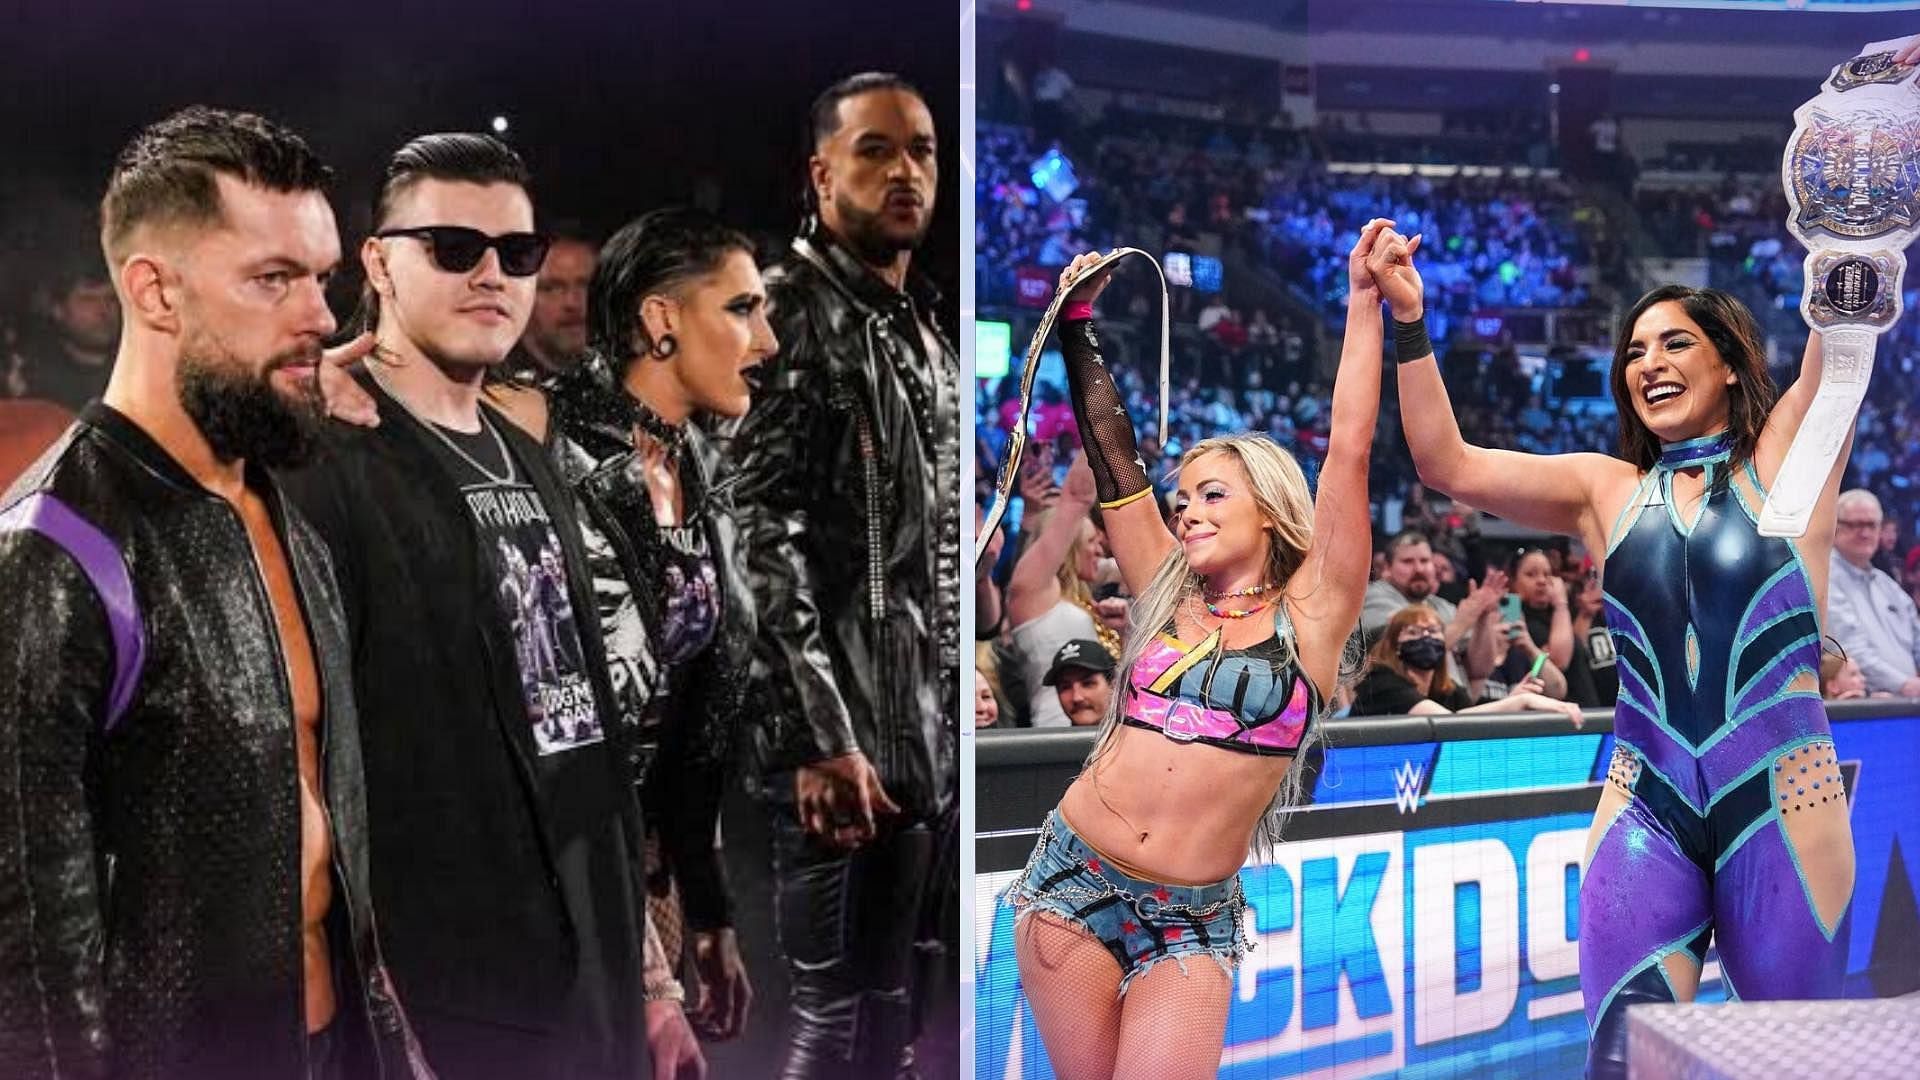 Some tag team stars could break out on their own in WWE